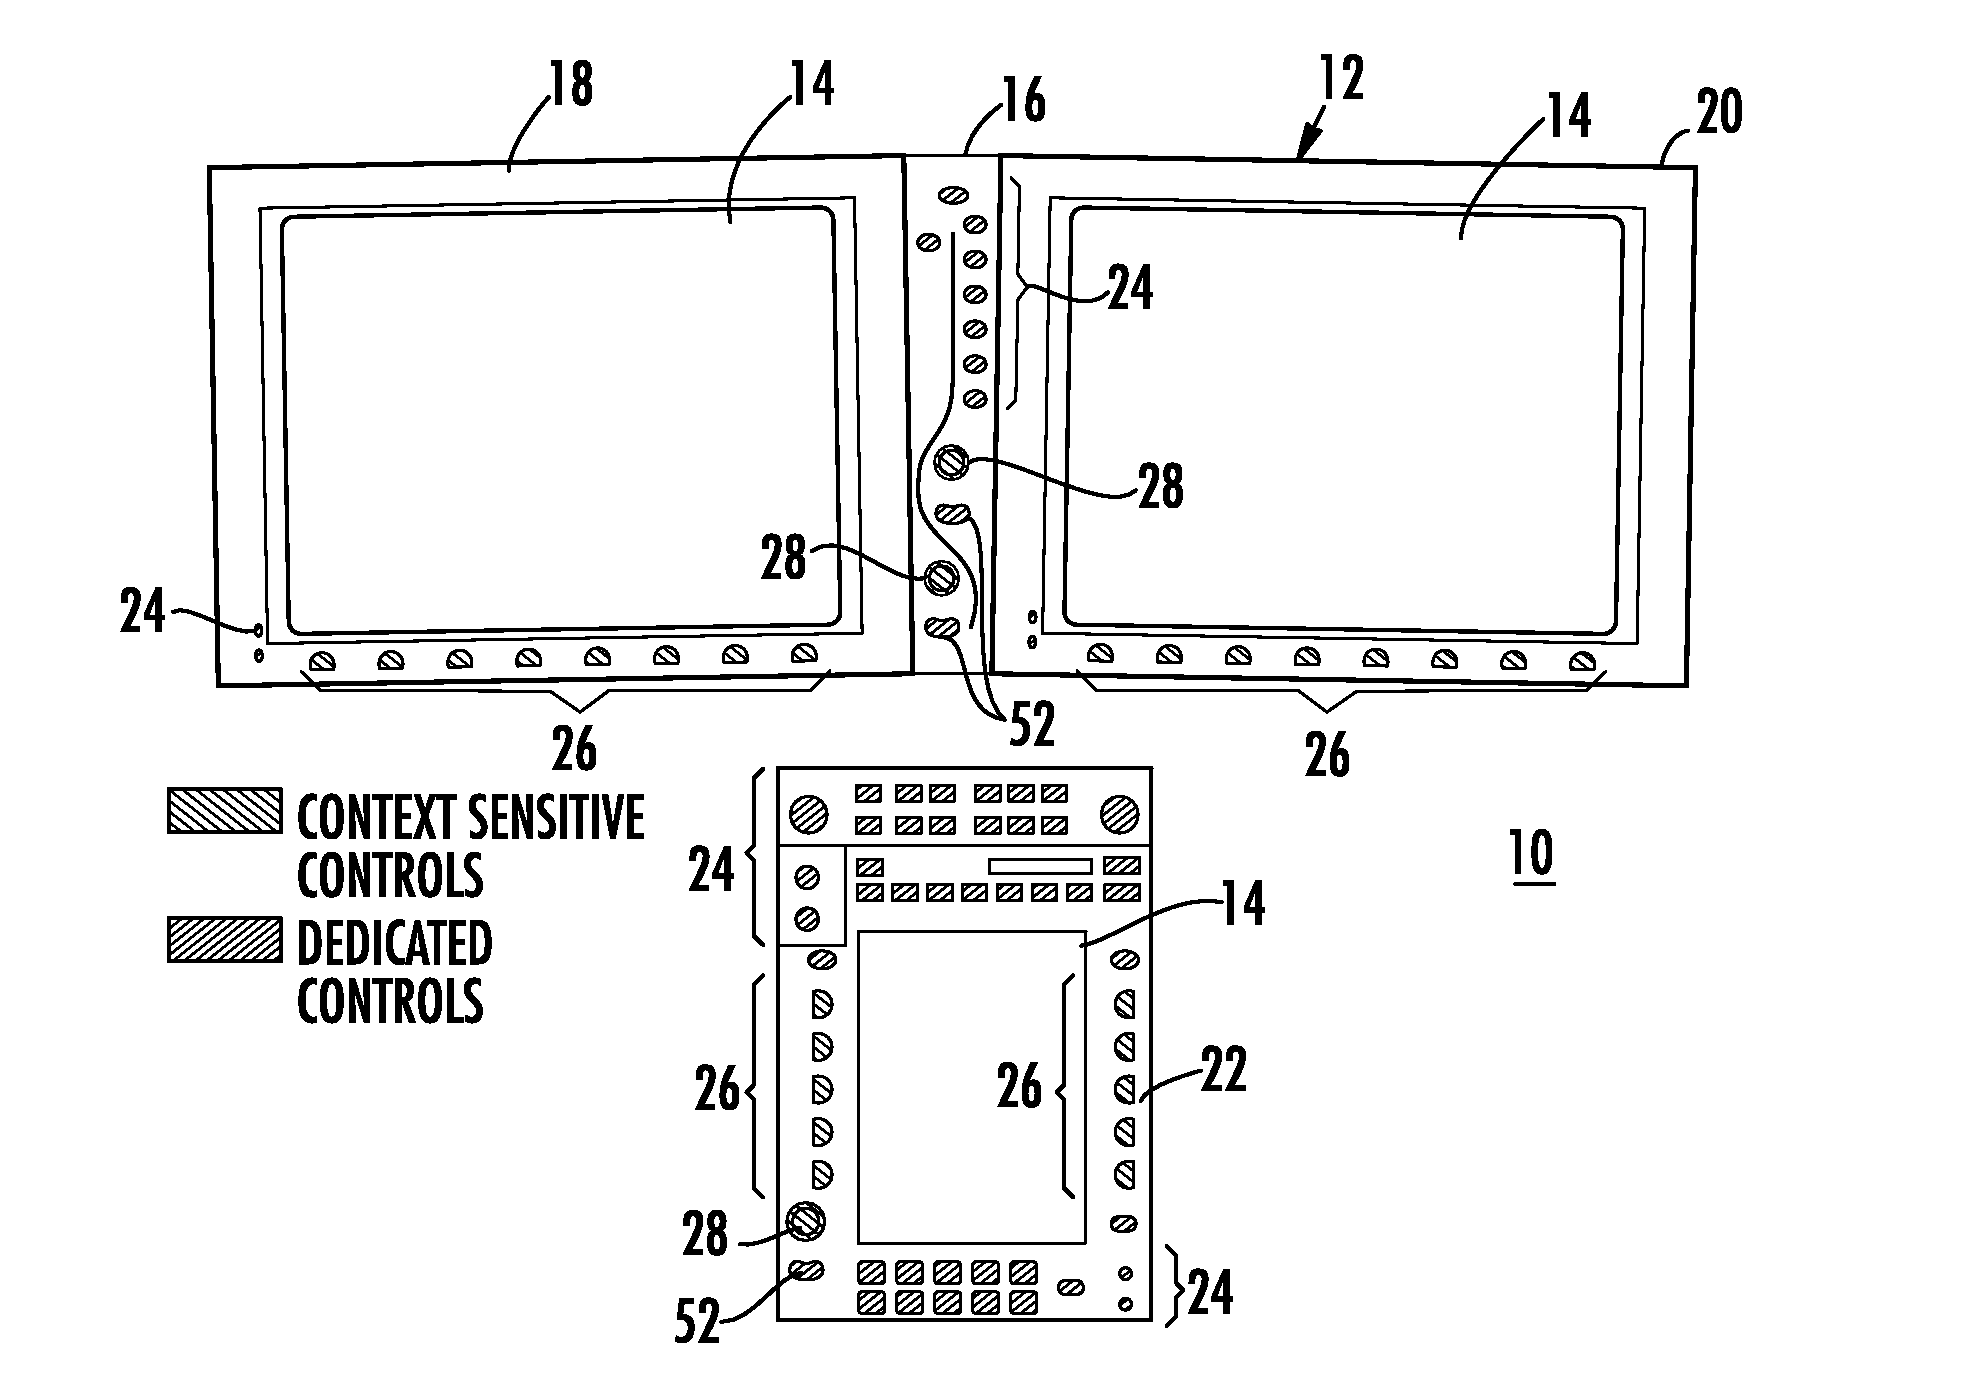 Aircraft avionic system having a pilot user interface with context dependent input devices